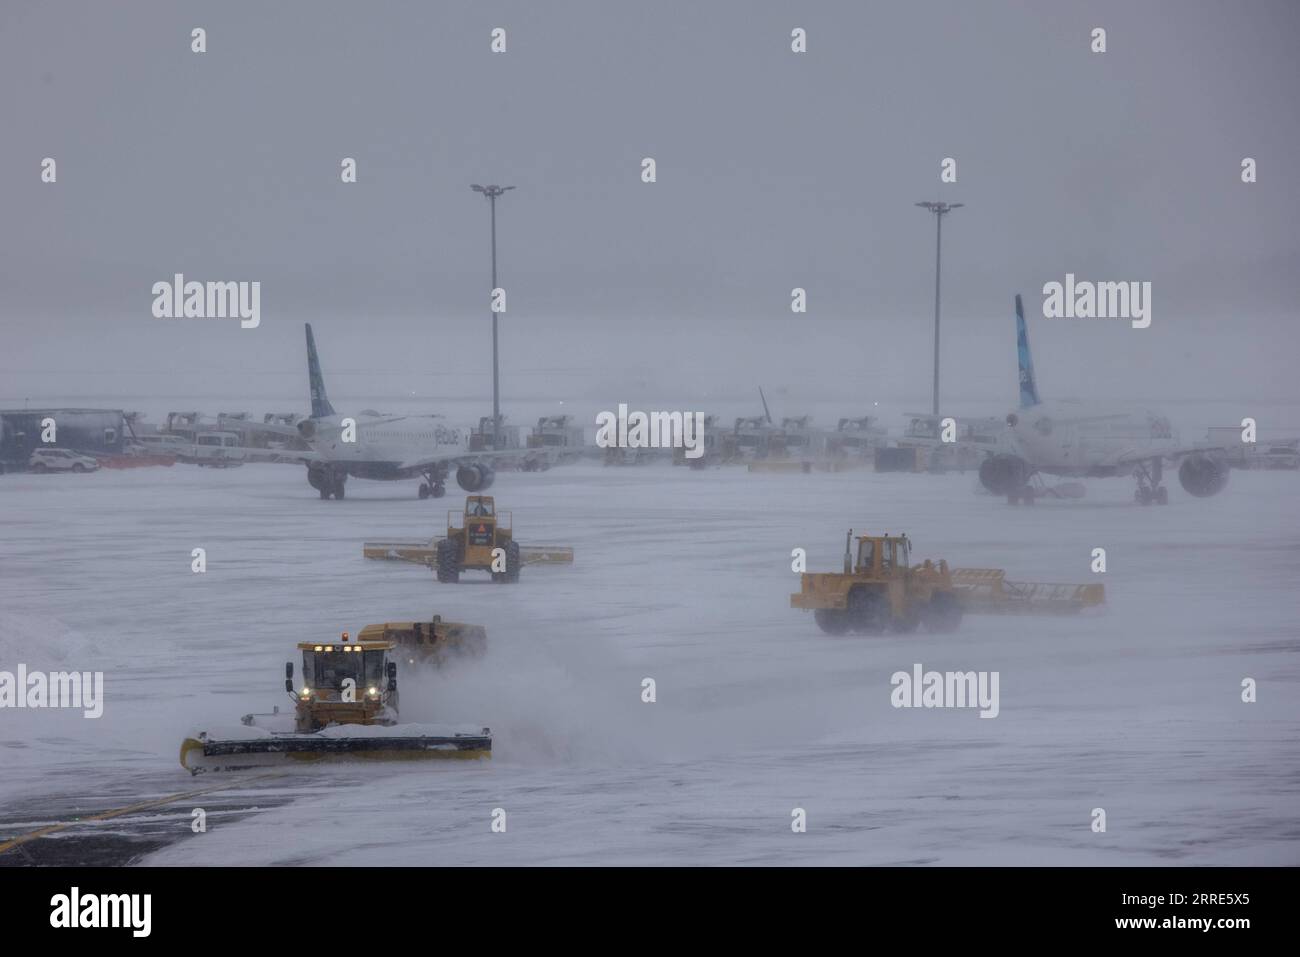 220130 -- NEW YORK, Jan. 30, 2022 -- Snow plows work at John F. Kennedy International Airport in New York, the United States, Jan. 29, 2022. Winter storm Kenan is bringing heavy snow and wind gusts to New York City and surrounding areas on Saturday. Snowfall at John F. Kennedy International Airport exceeded 5 inches in the last 12 hours, said a tweet from the National Weather Service at 9 a.m. on Saturday. As much as 460 flights from John F. Kennedy International Airport were canceled accounting for 80 percent of the total, according to travel information platform flightaware.com. Photo by /Xi Stock Photo